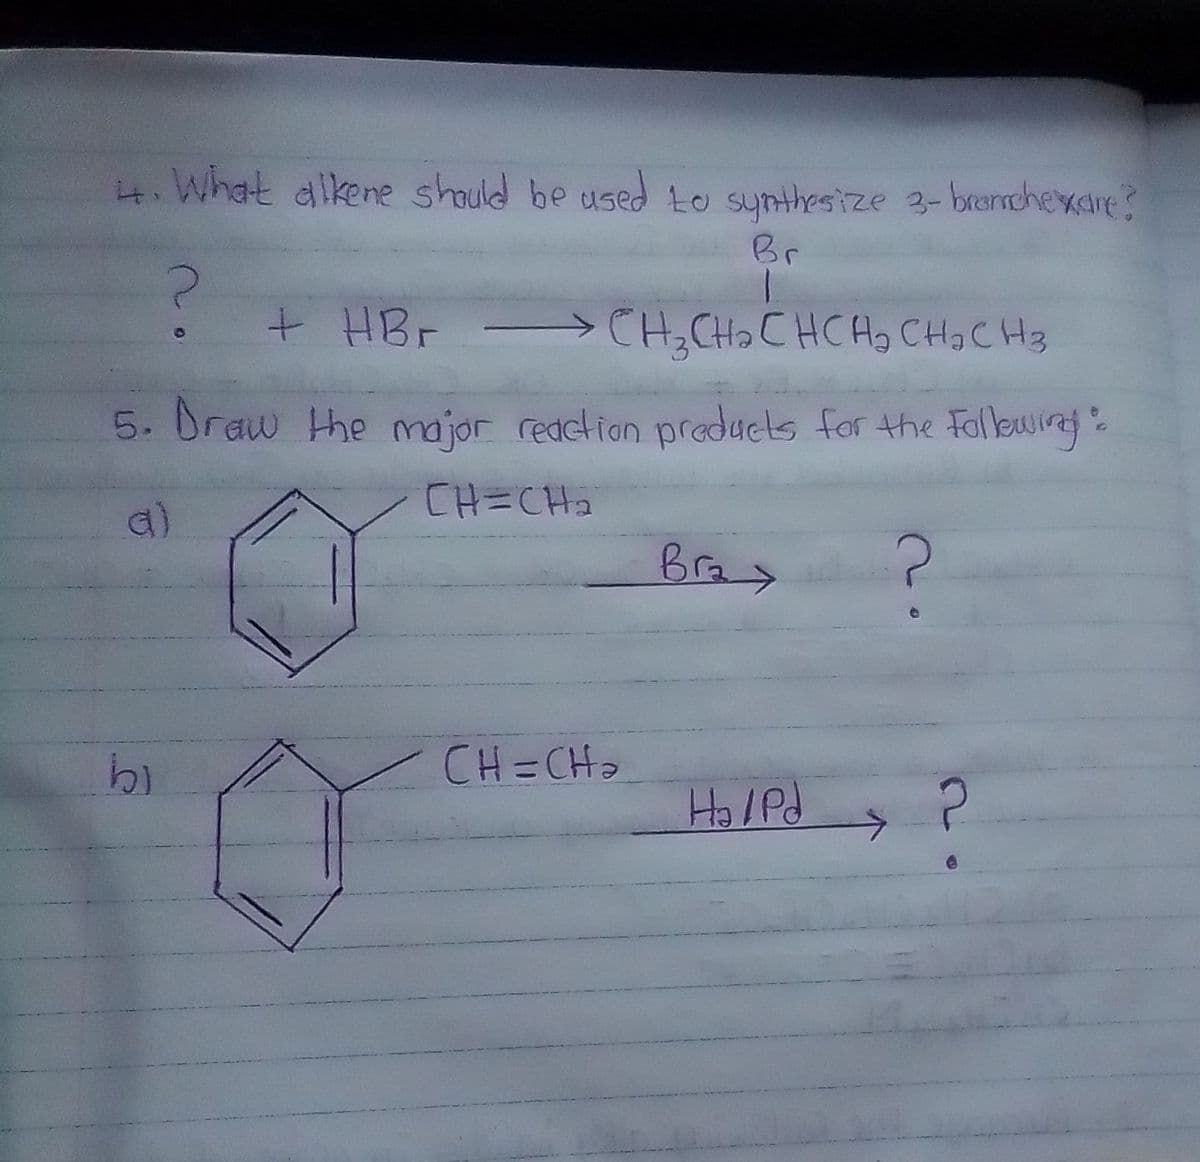 i4. What alkene should be used to synthesize 3-brernchexare?
Br
+ HBr > CH;CH, CHCH, CHa CH3
5. Draw he major redction praducls for the Follewirej.
CH=CHa
Bra>
19
CH=CHo
Ho/Pd
